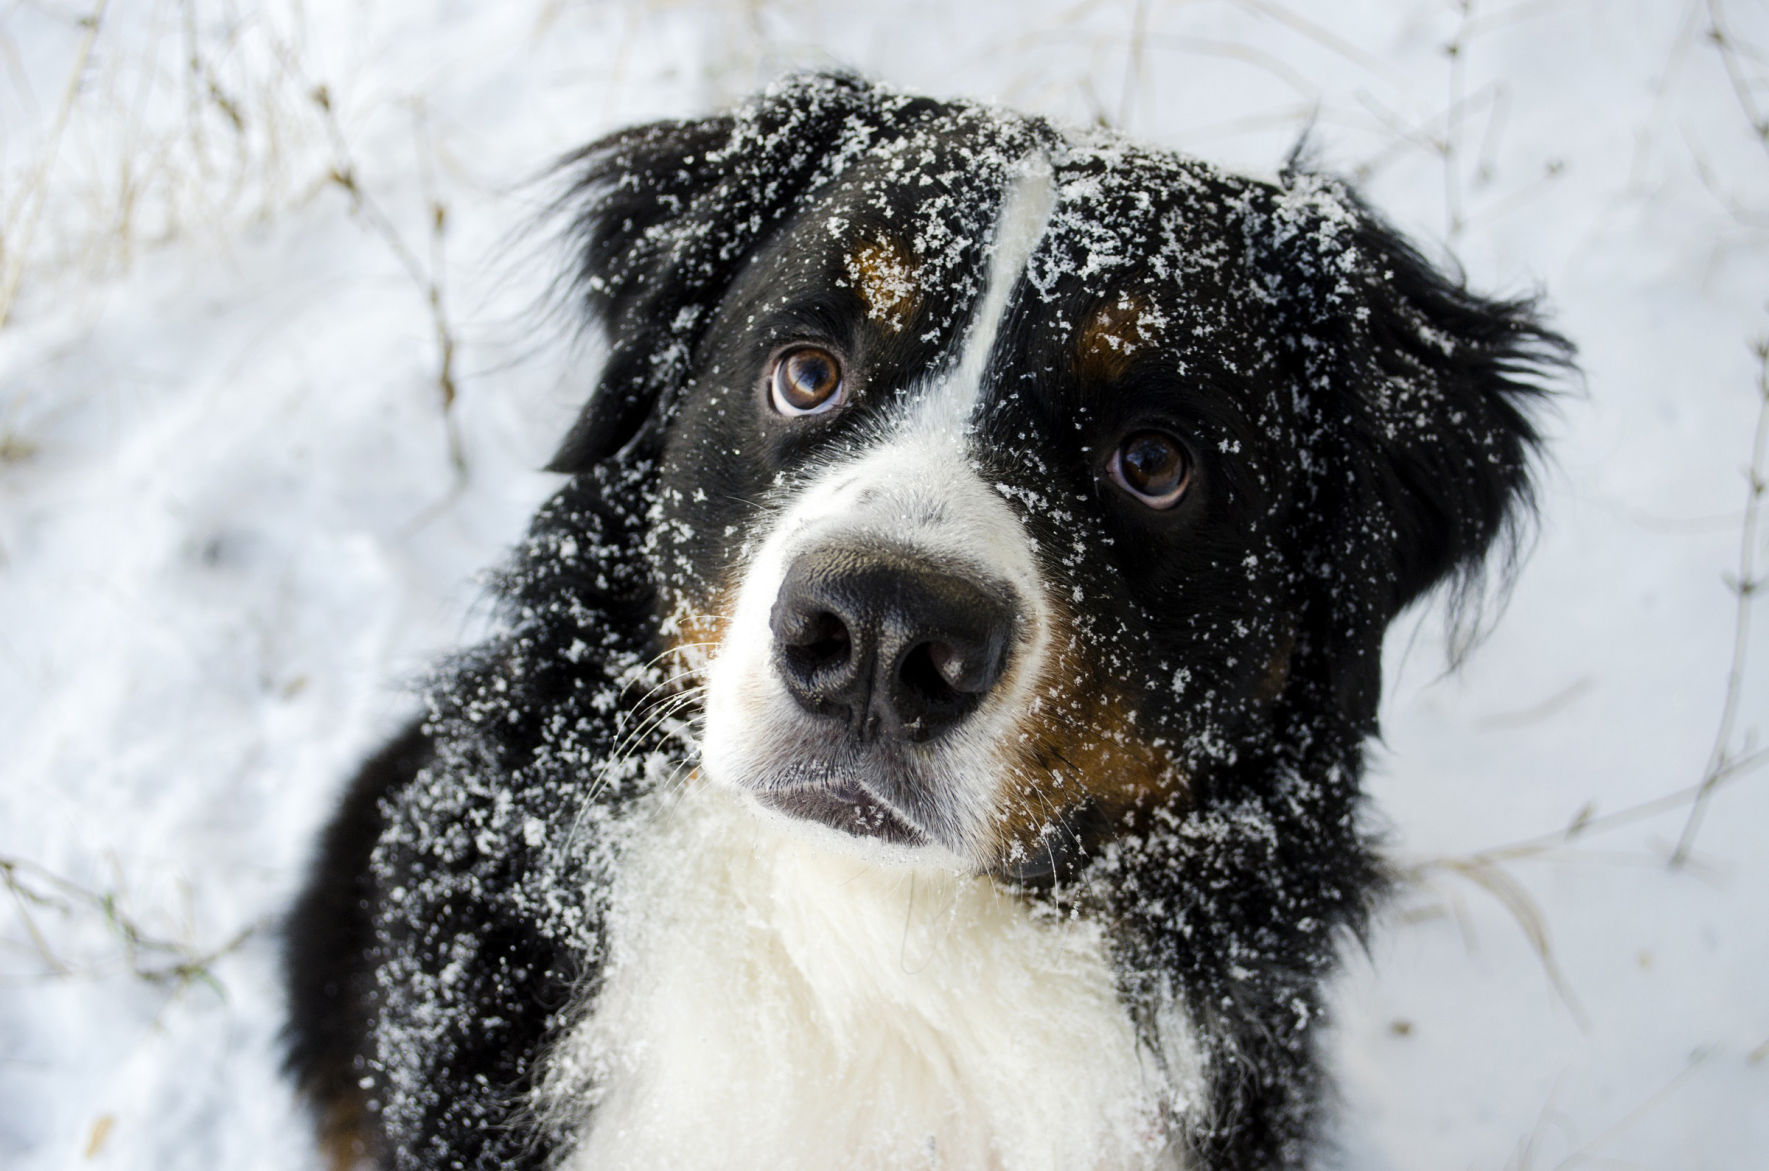 Pet owners must take action to ensure their four-legged friends stay warm and healthy through the winter season. (Photo courtesy of OSU Extension.)